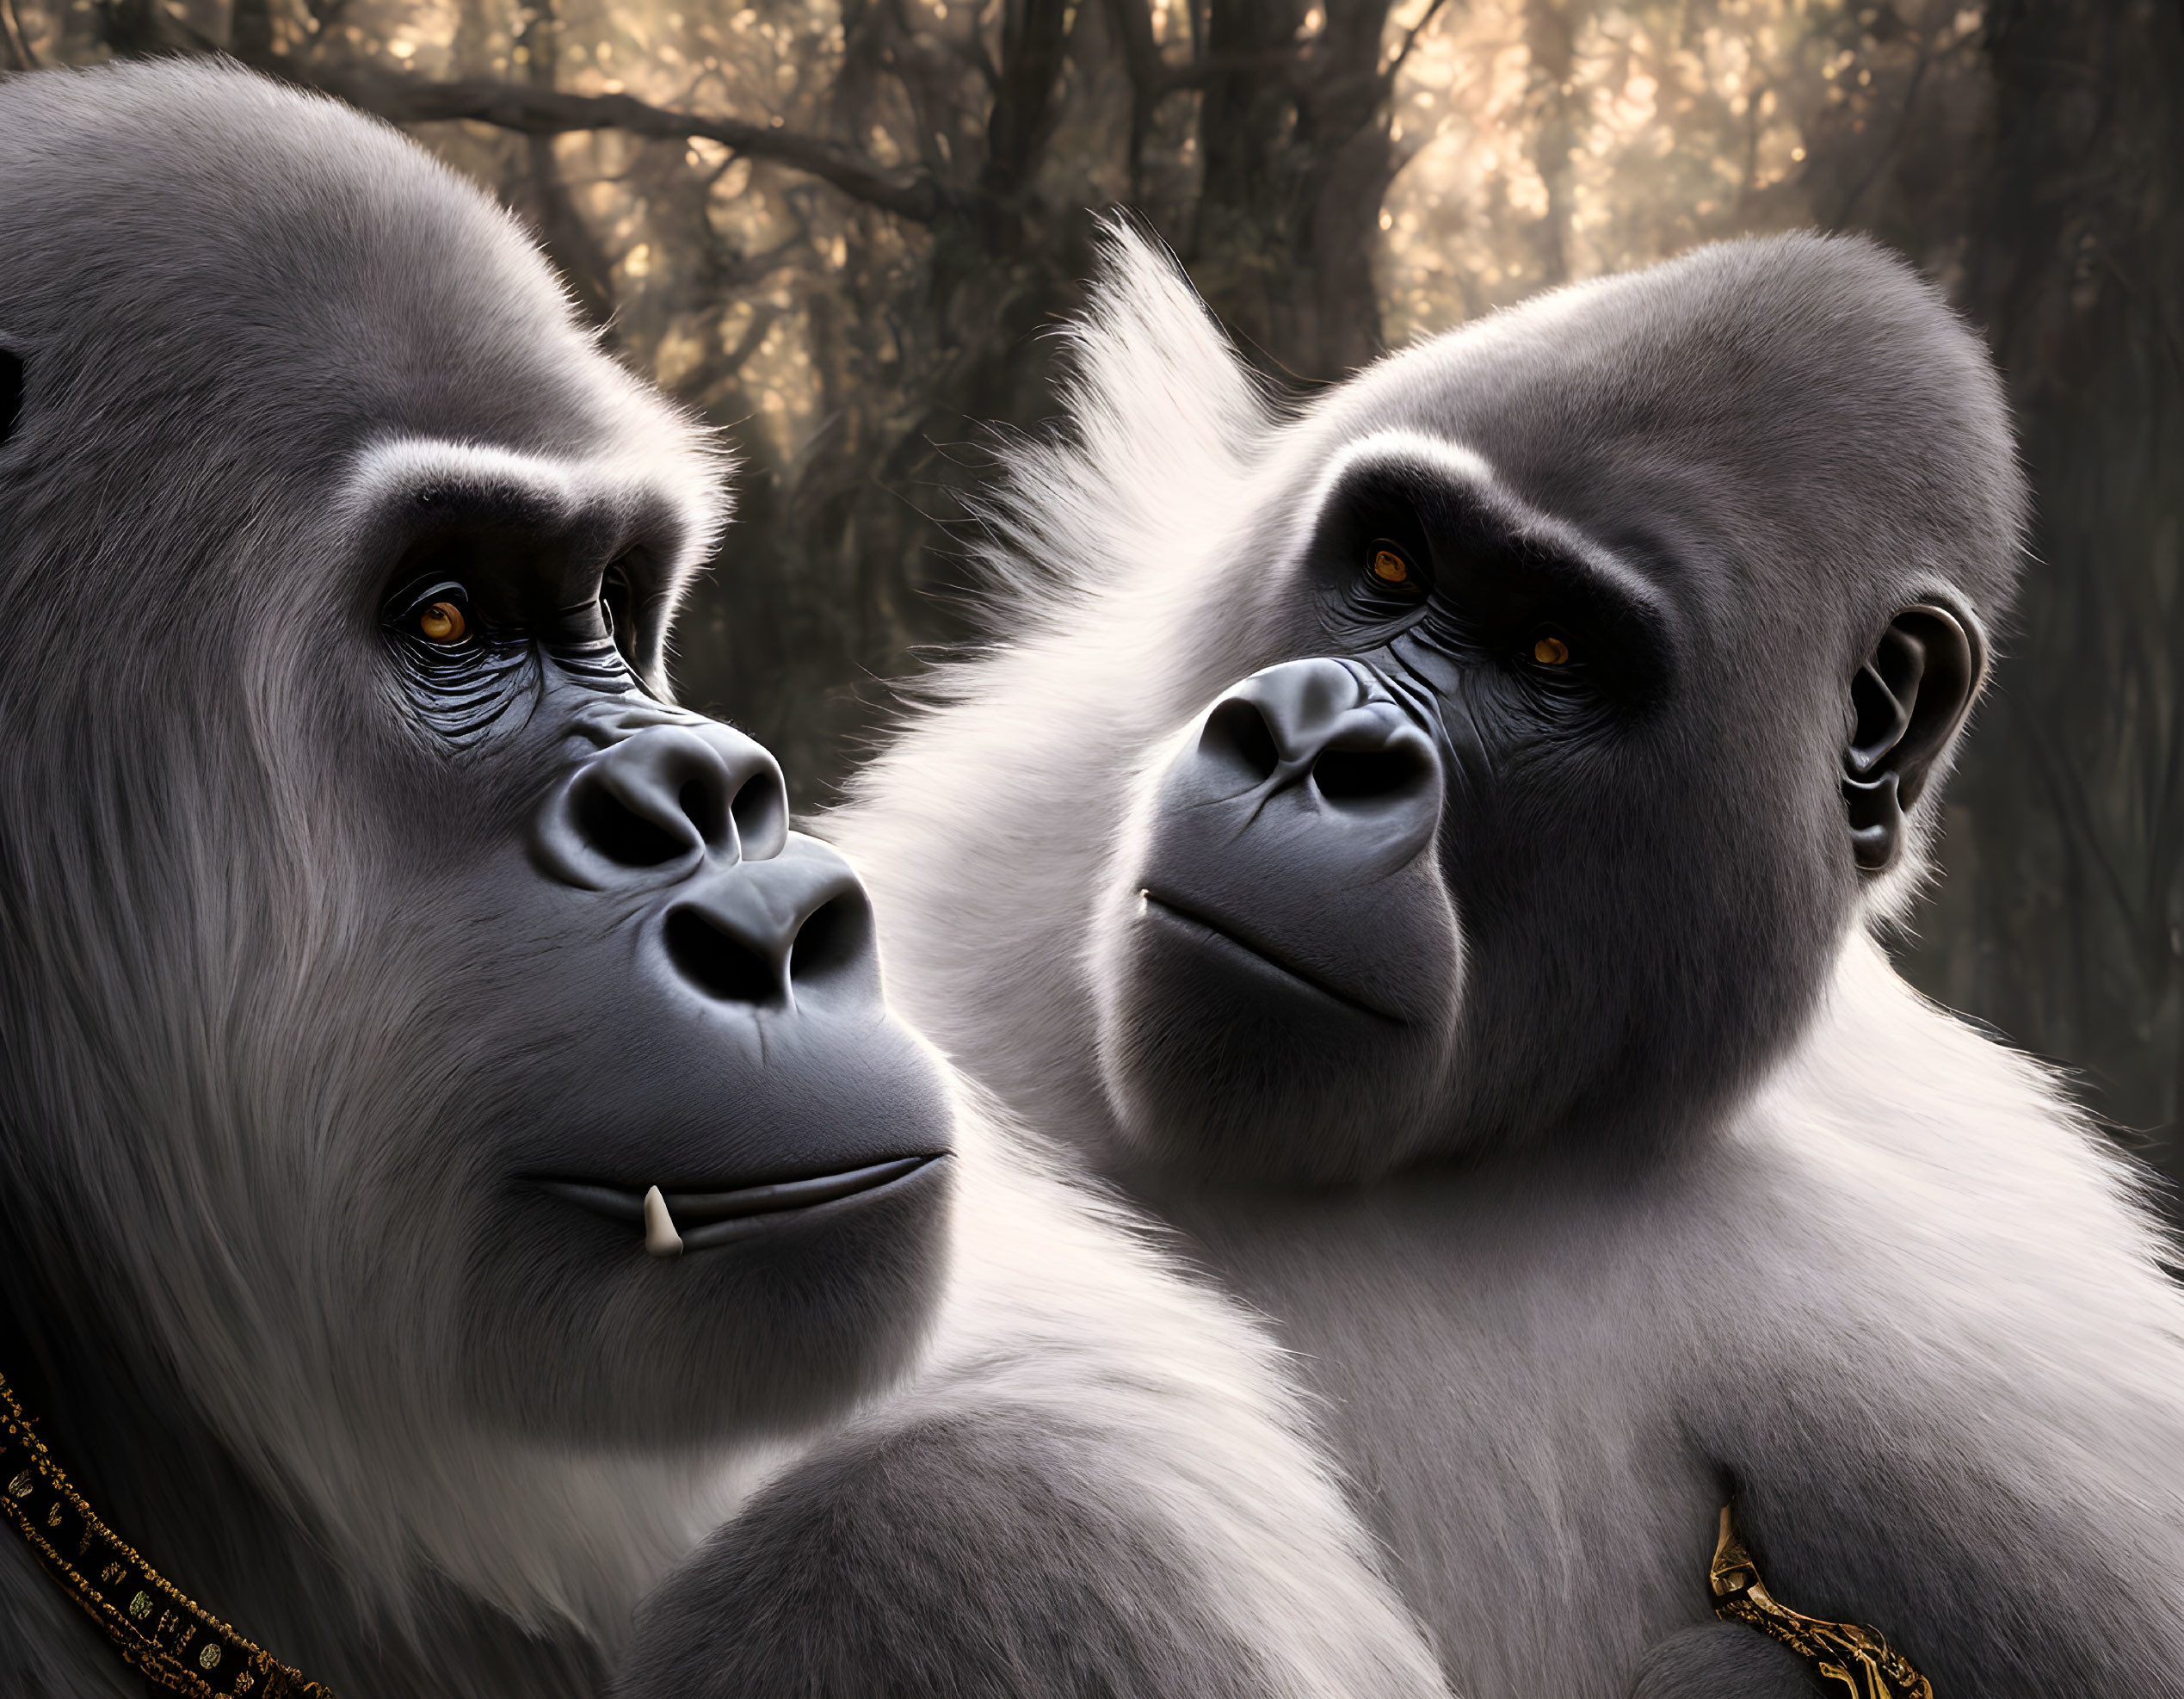 Detailed Close-Up of Two Gorillas in Misty Forest